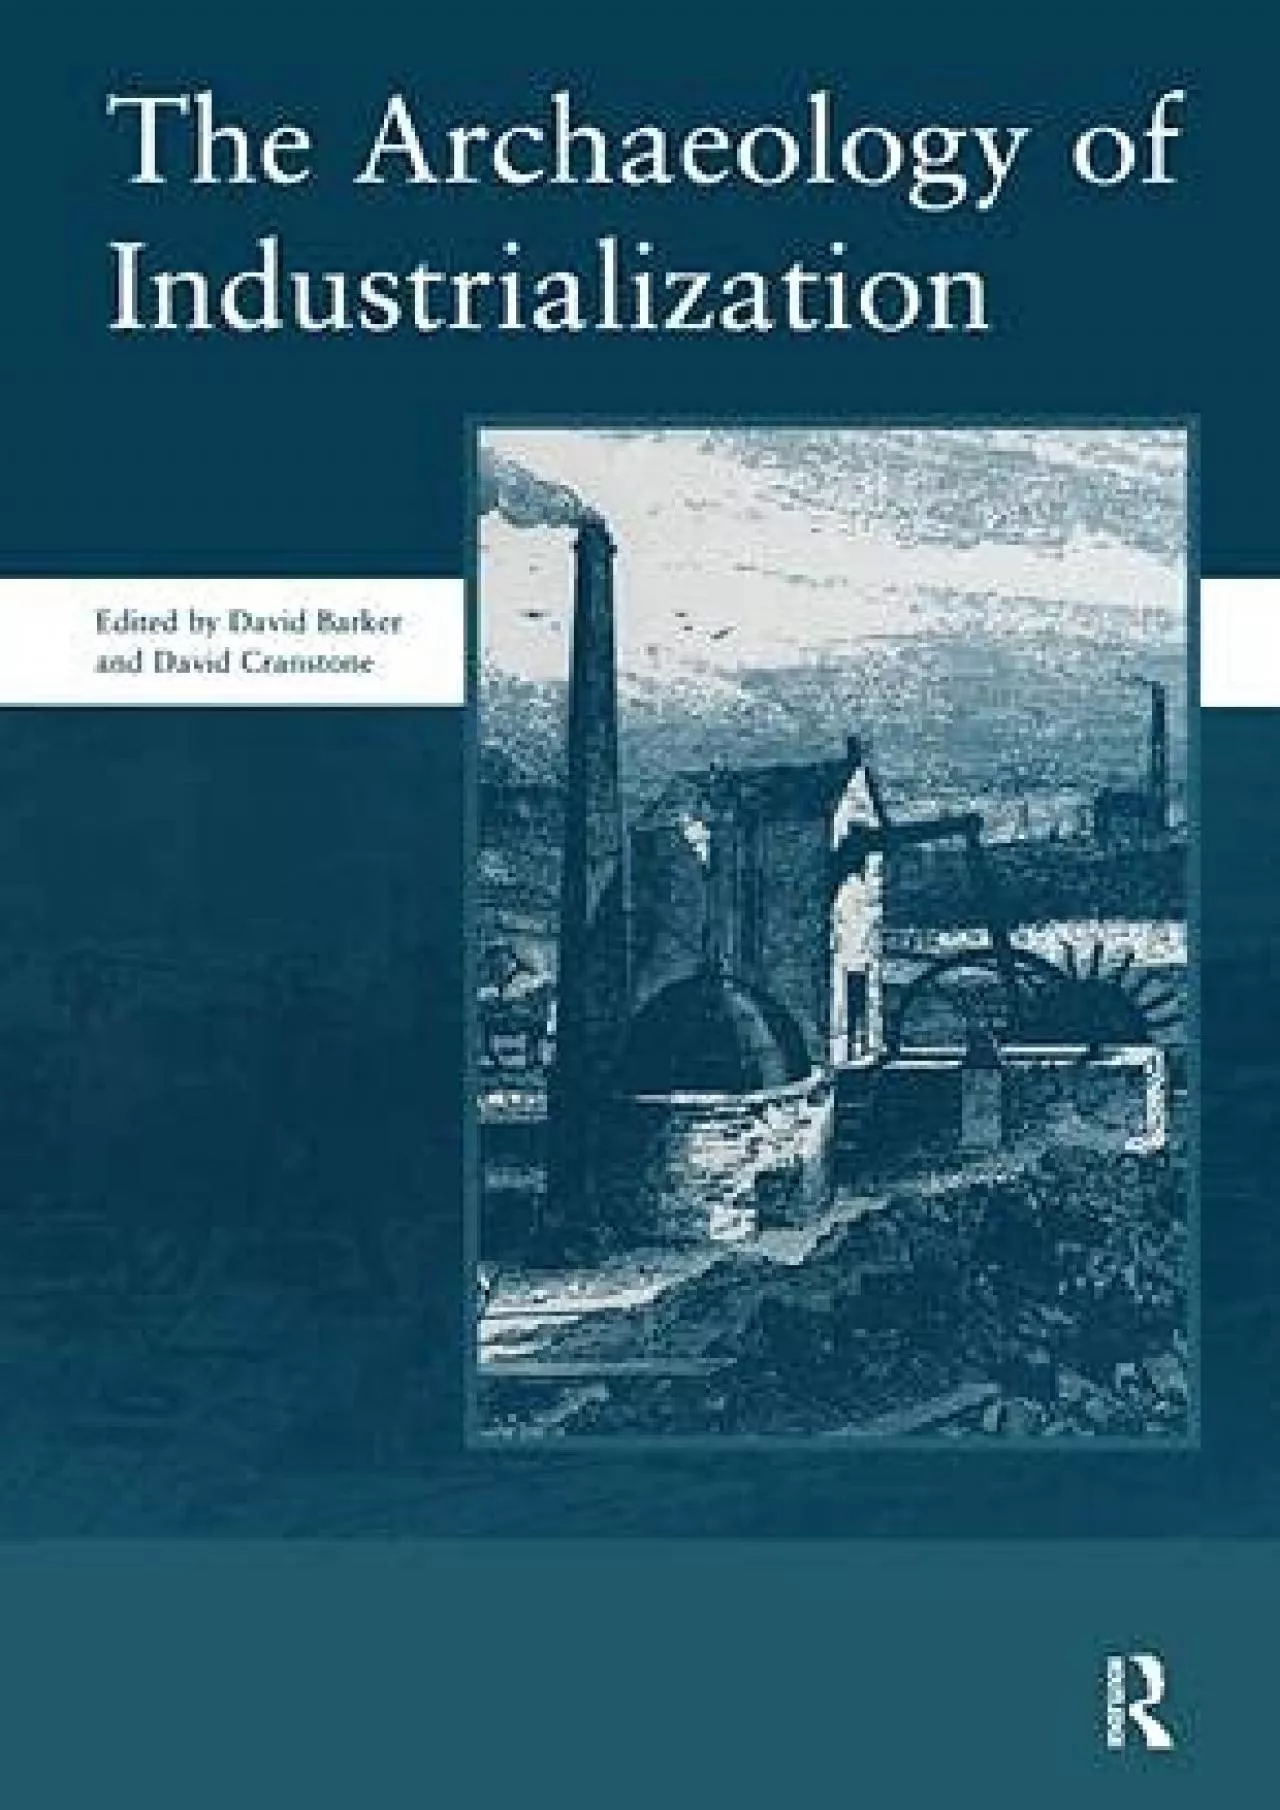 [DOWNLOAD]-The Archaeology of Industrialization: Society of Post-Medieval Archaeology